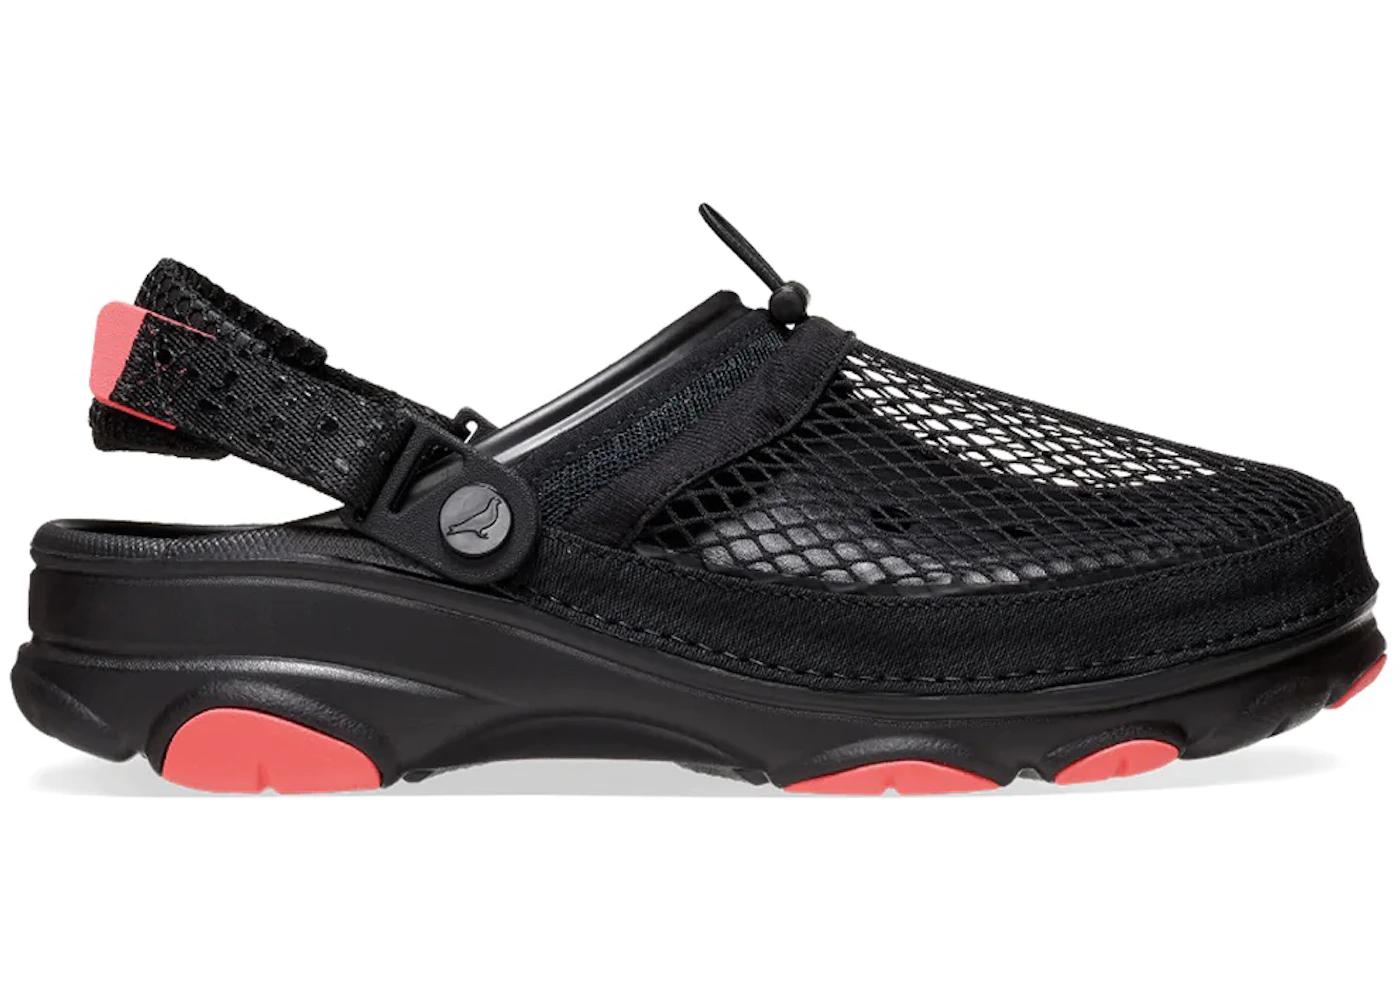 Classic All-Terrain Clog Staple Homing Pigeon by CROCS